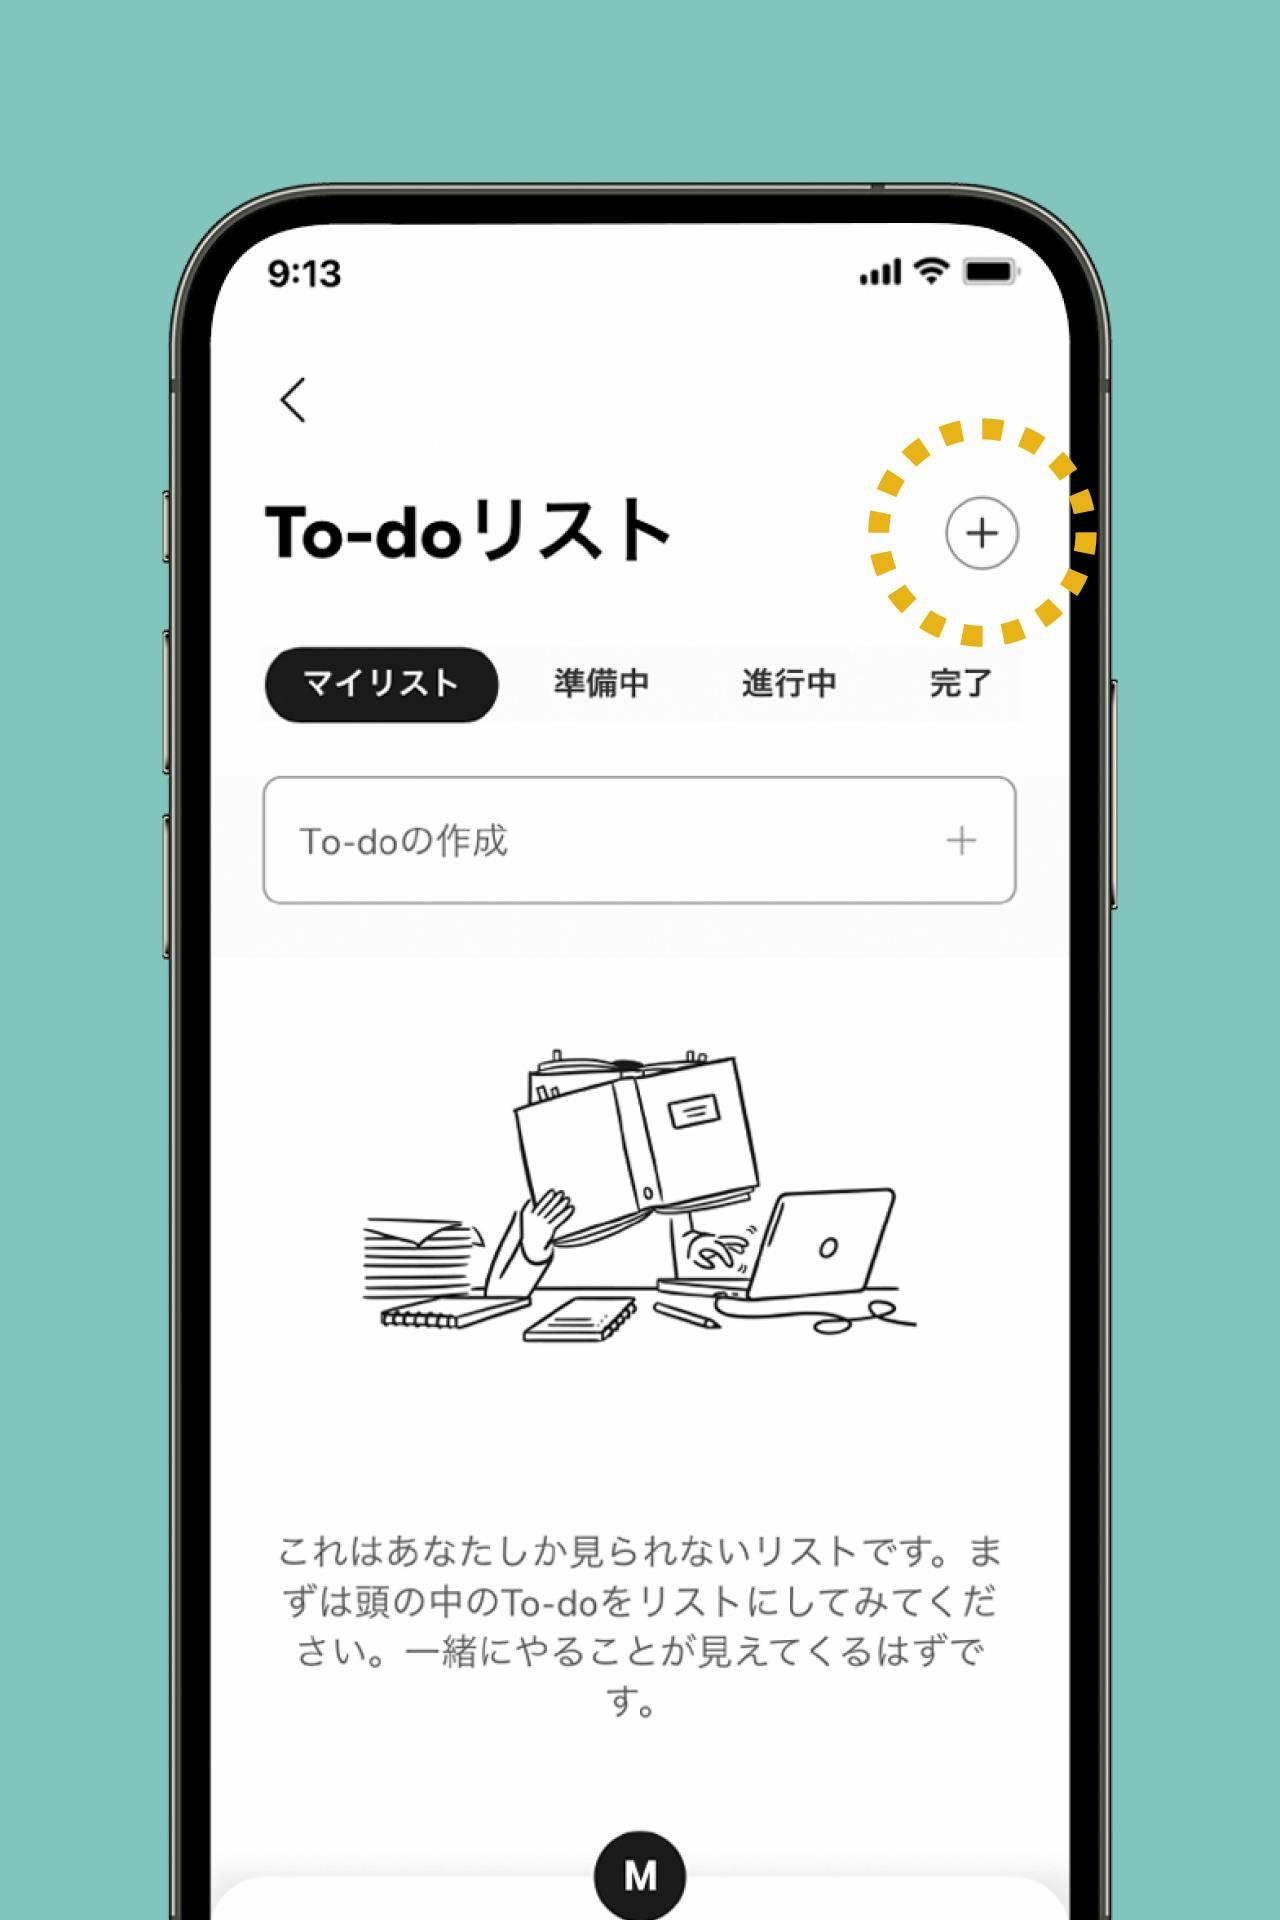 To-doリストの表示画面